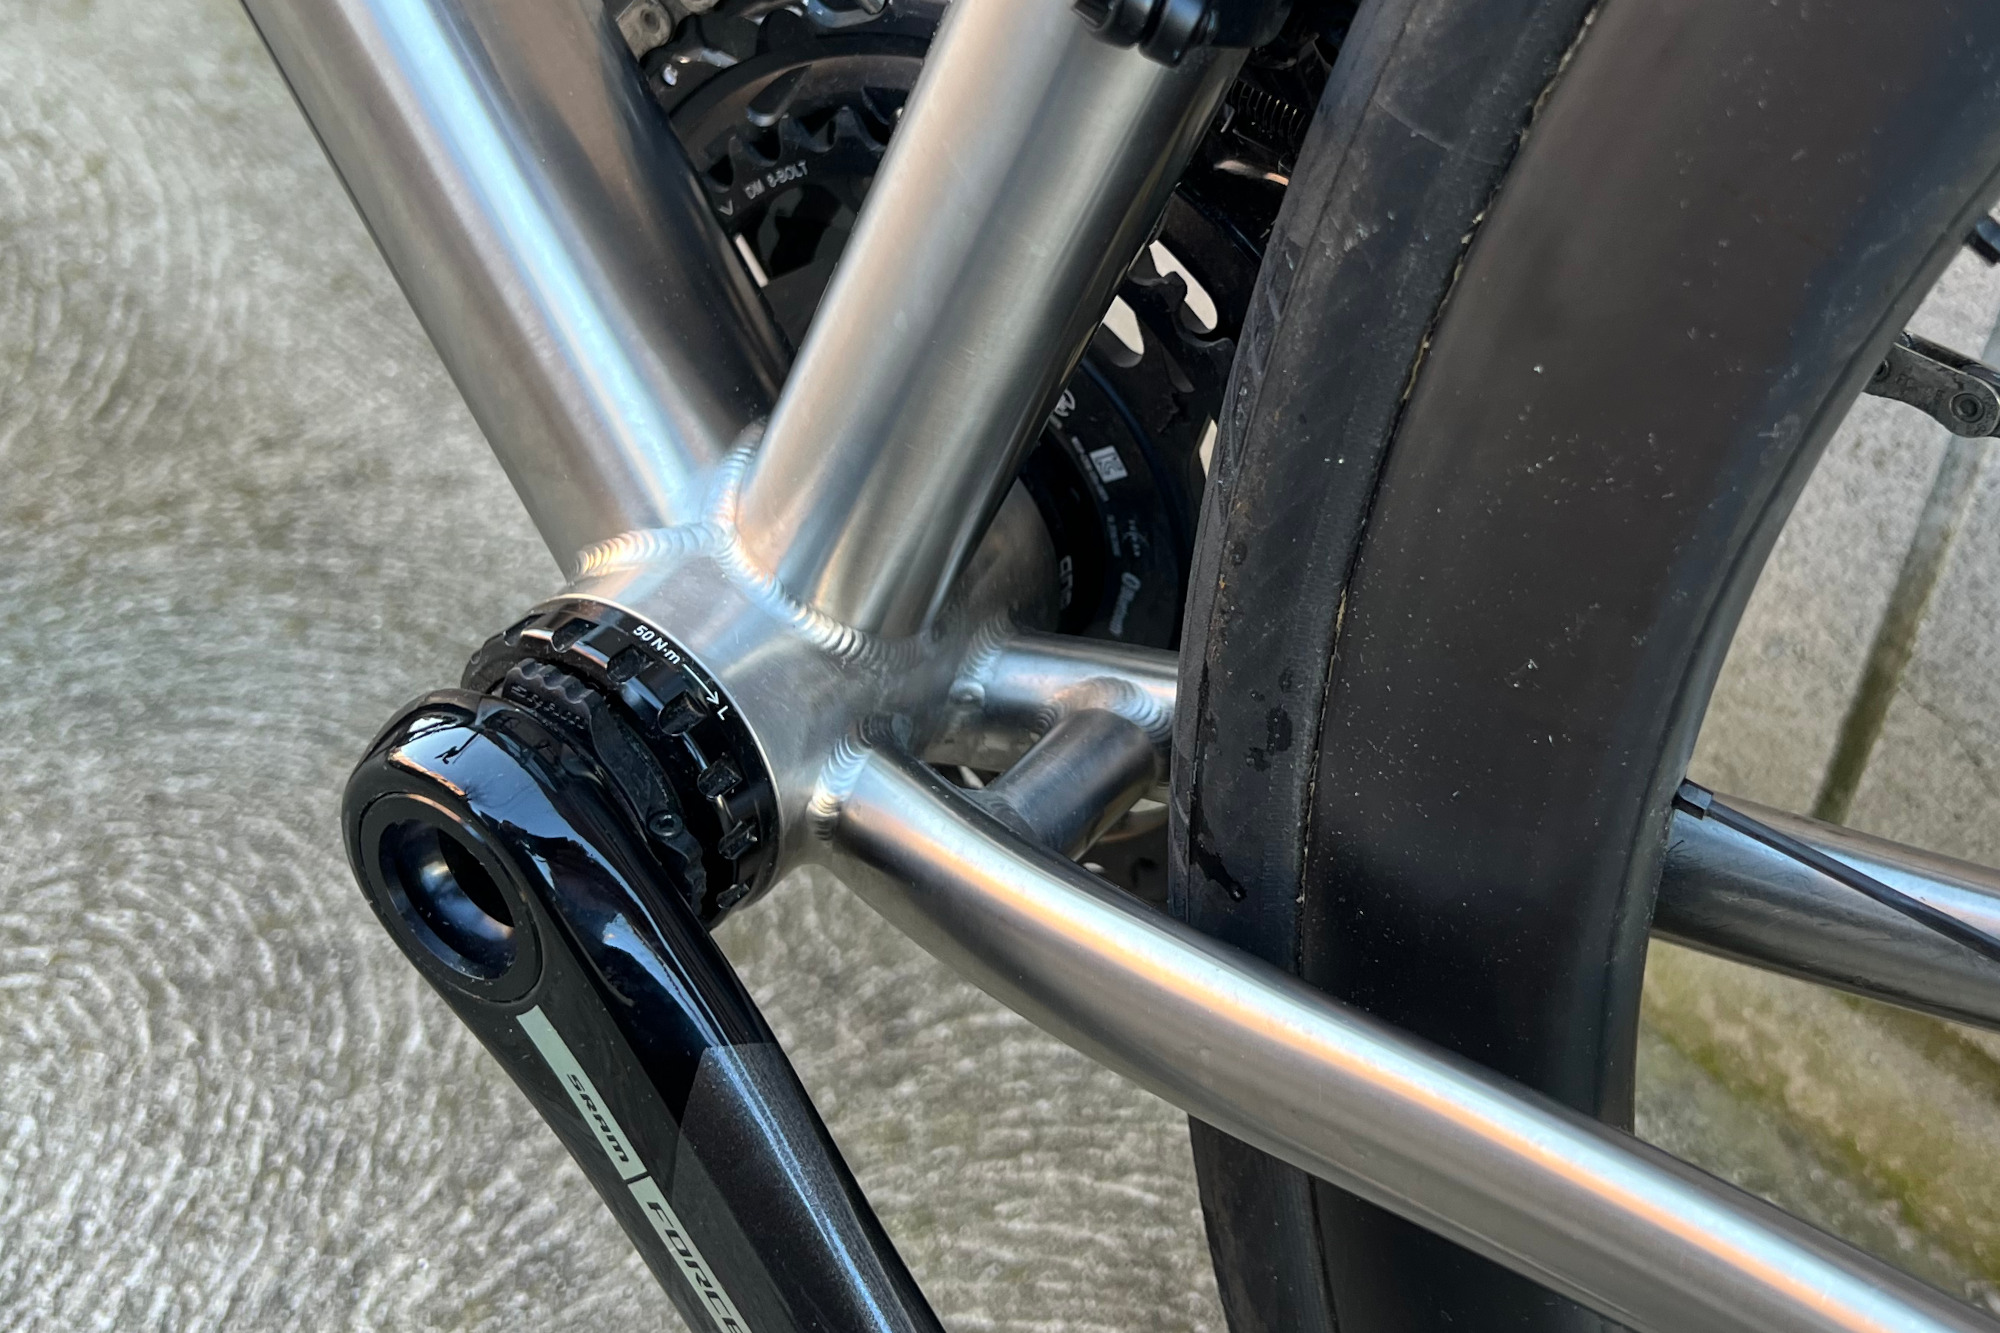 Blackheart Bike Co's Road Ti: Welds at the bottom bracket look consistent and clean on the Blackheart Road Ti.